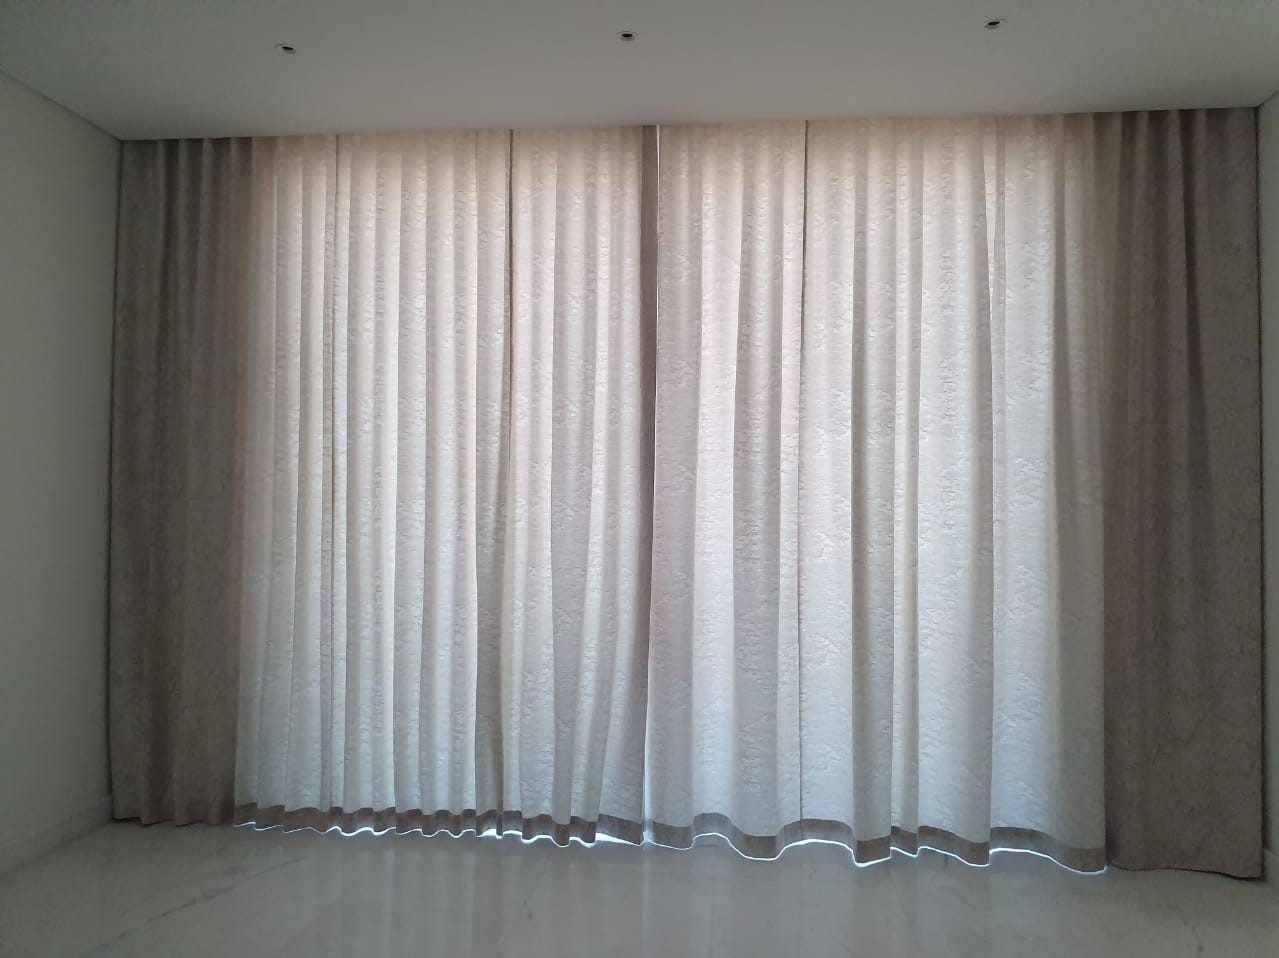 Motorized Curtains - Electric Automatic Drapery In Dubai - BlindsDxB